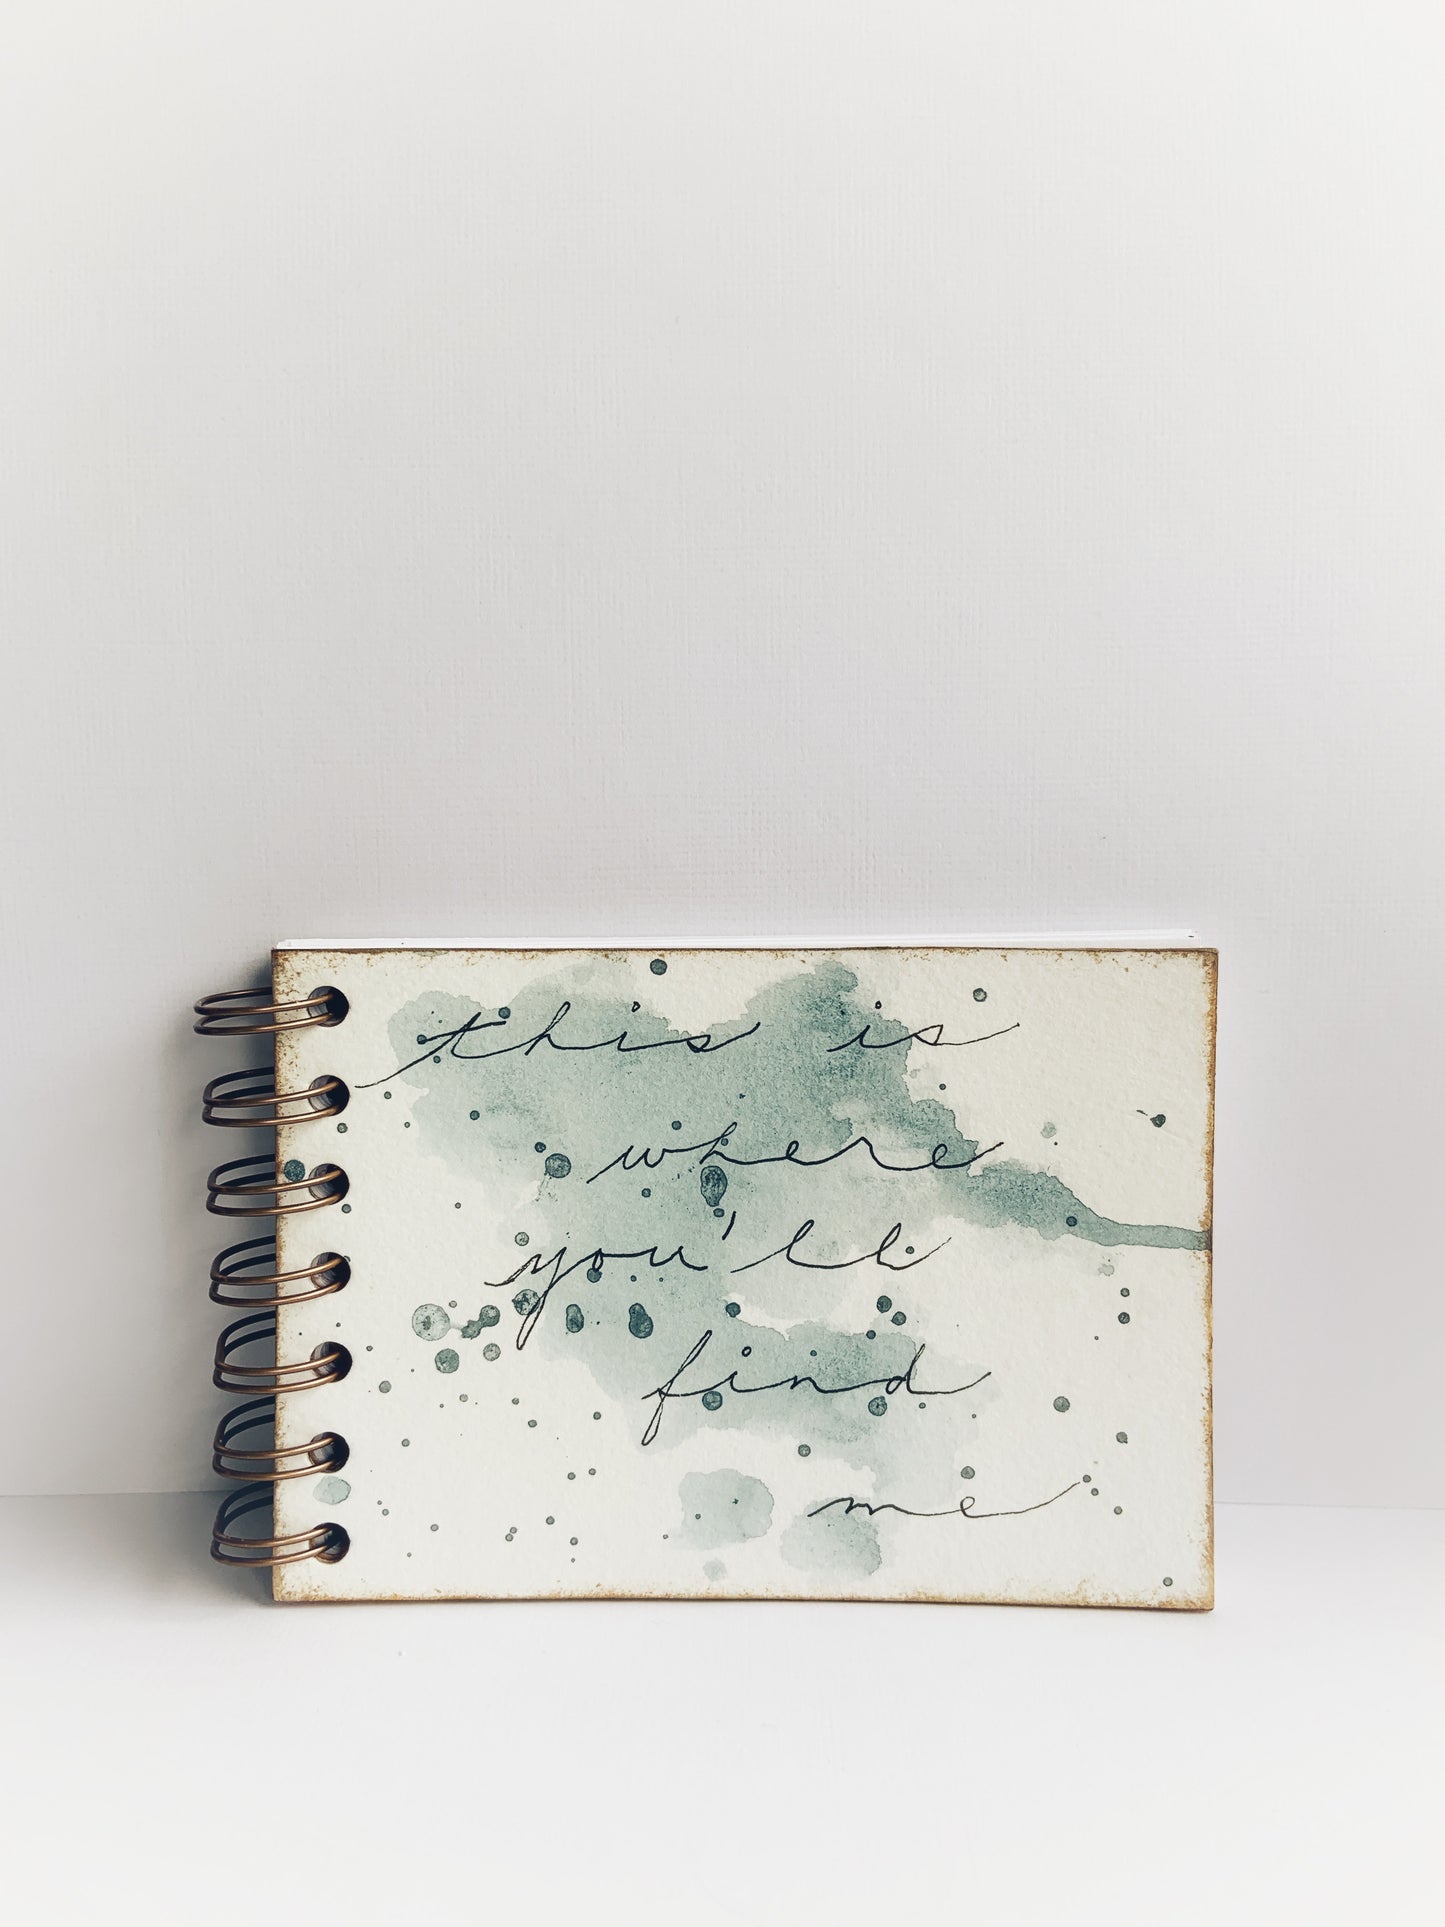 Small coil-bound handmade journal with 'this is where you'll find me' written on a paint-spattered cover